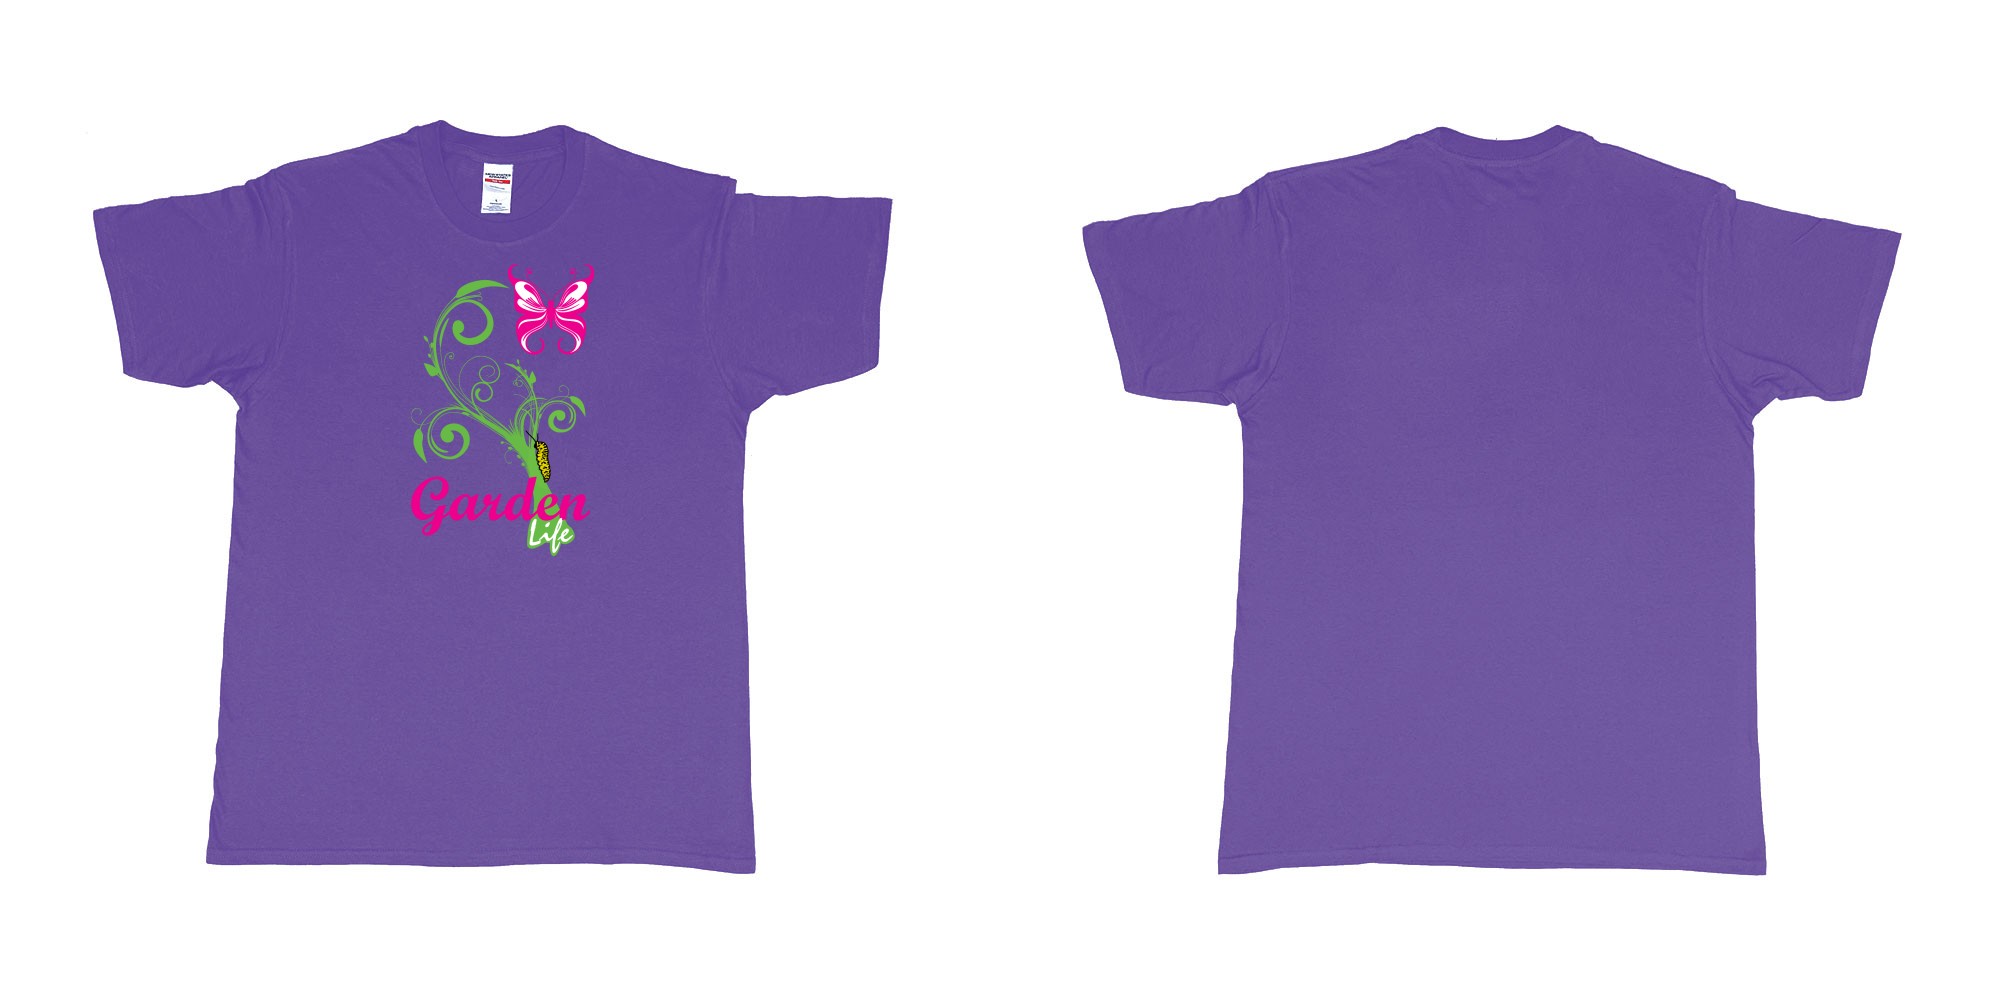 Custom tshirt design garden life transformation from a caterpillar and a butterfly in fabric color purple choice your own text made in Bali by The Pirate Way